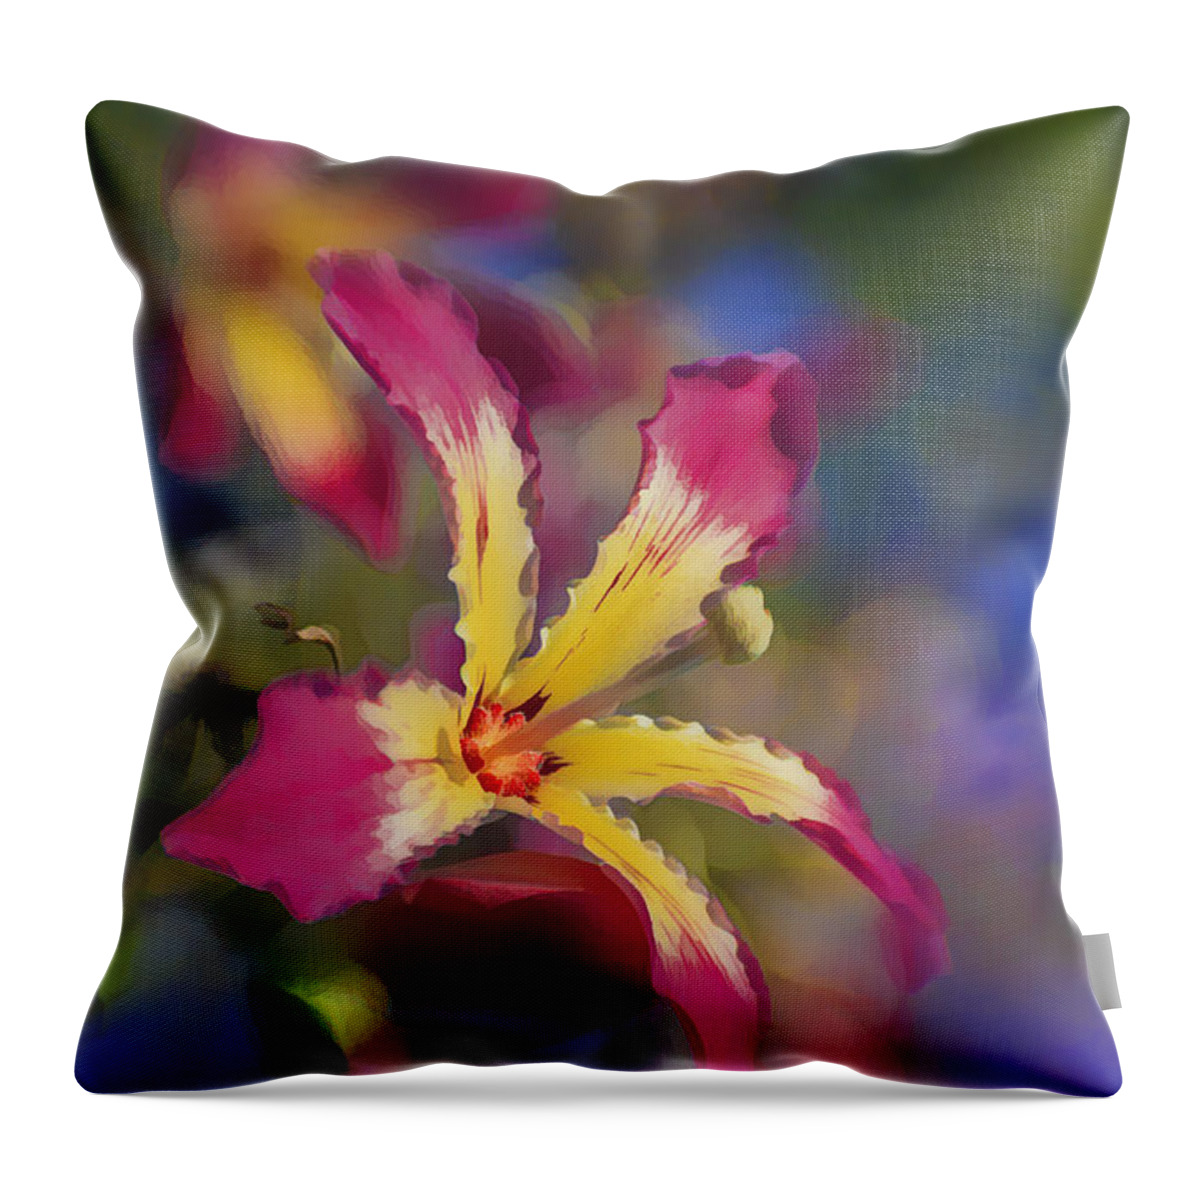 Hot Pink Throw Pillow featuring the photograph Bloomin Hong Kong Orchid by Scott Campbell